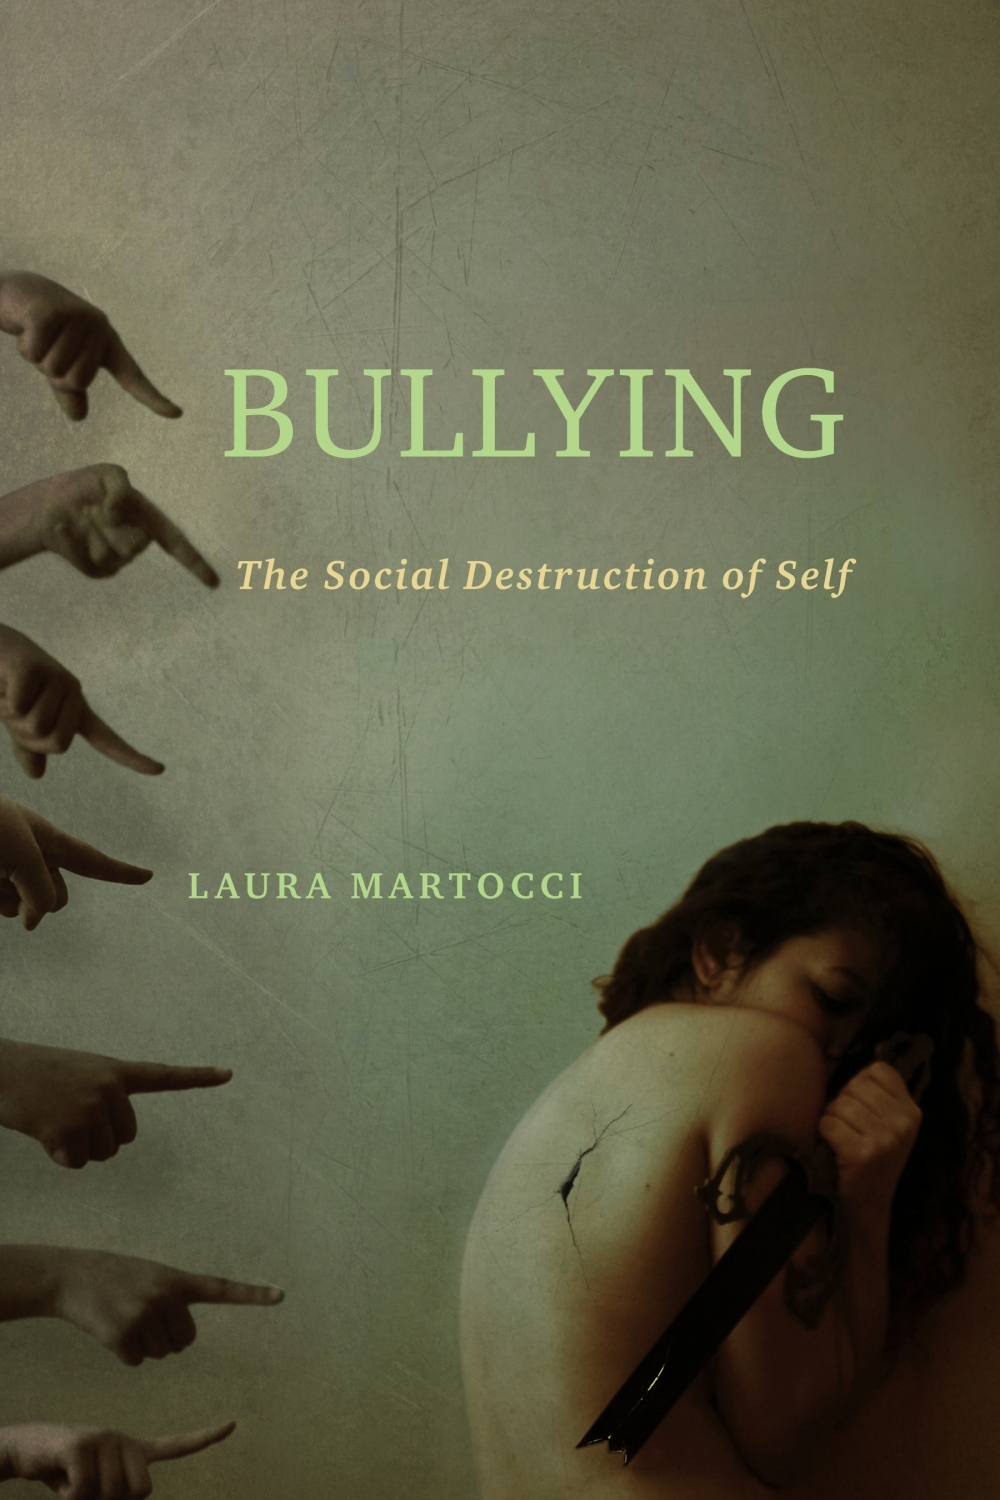 foreign literature in research about bullying